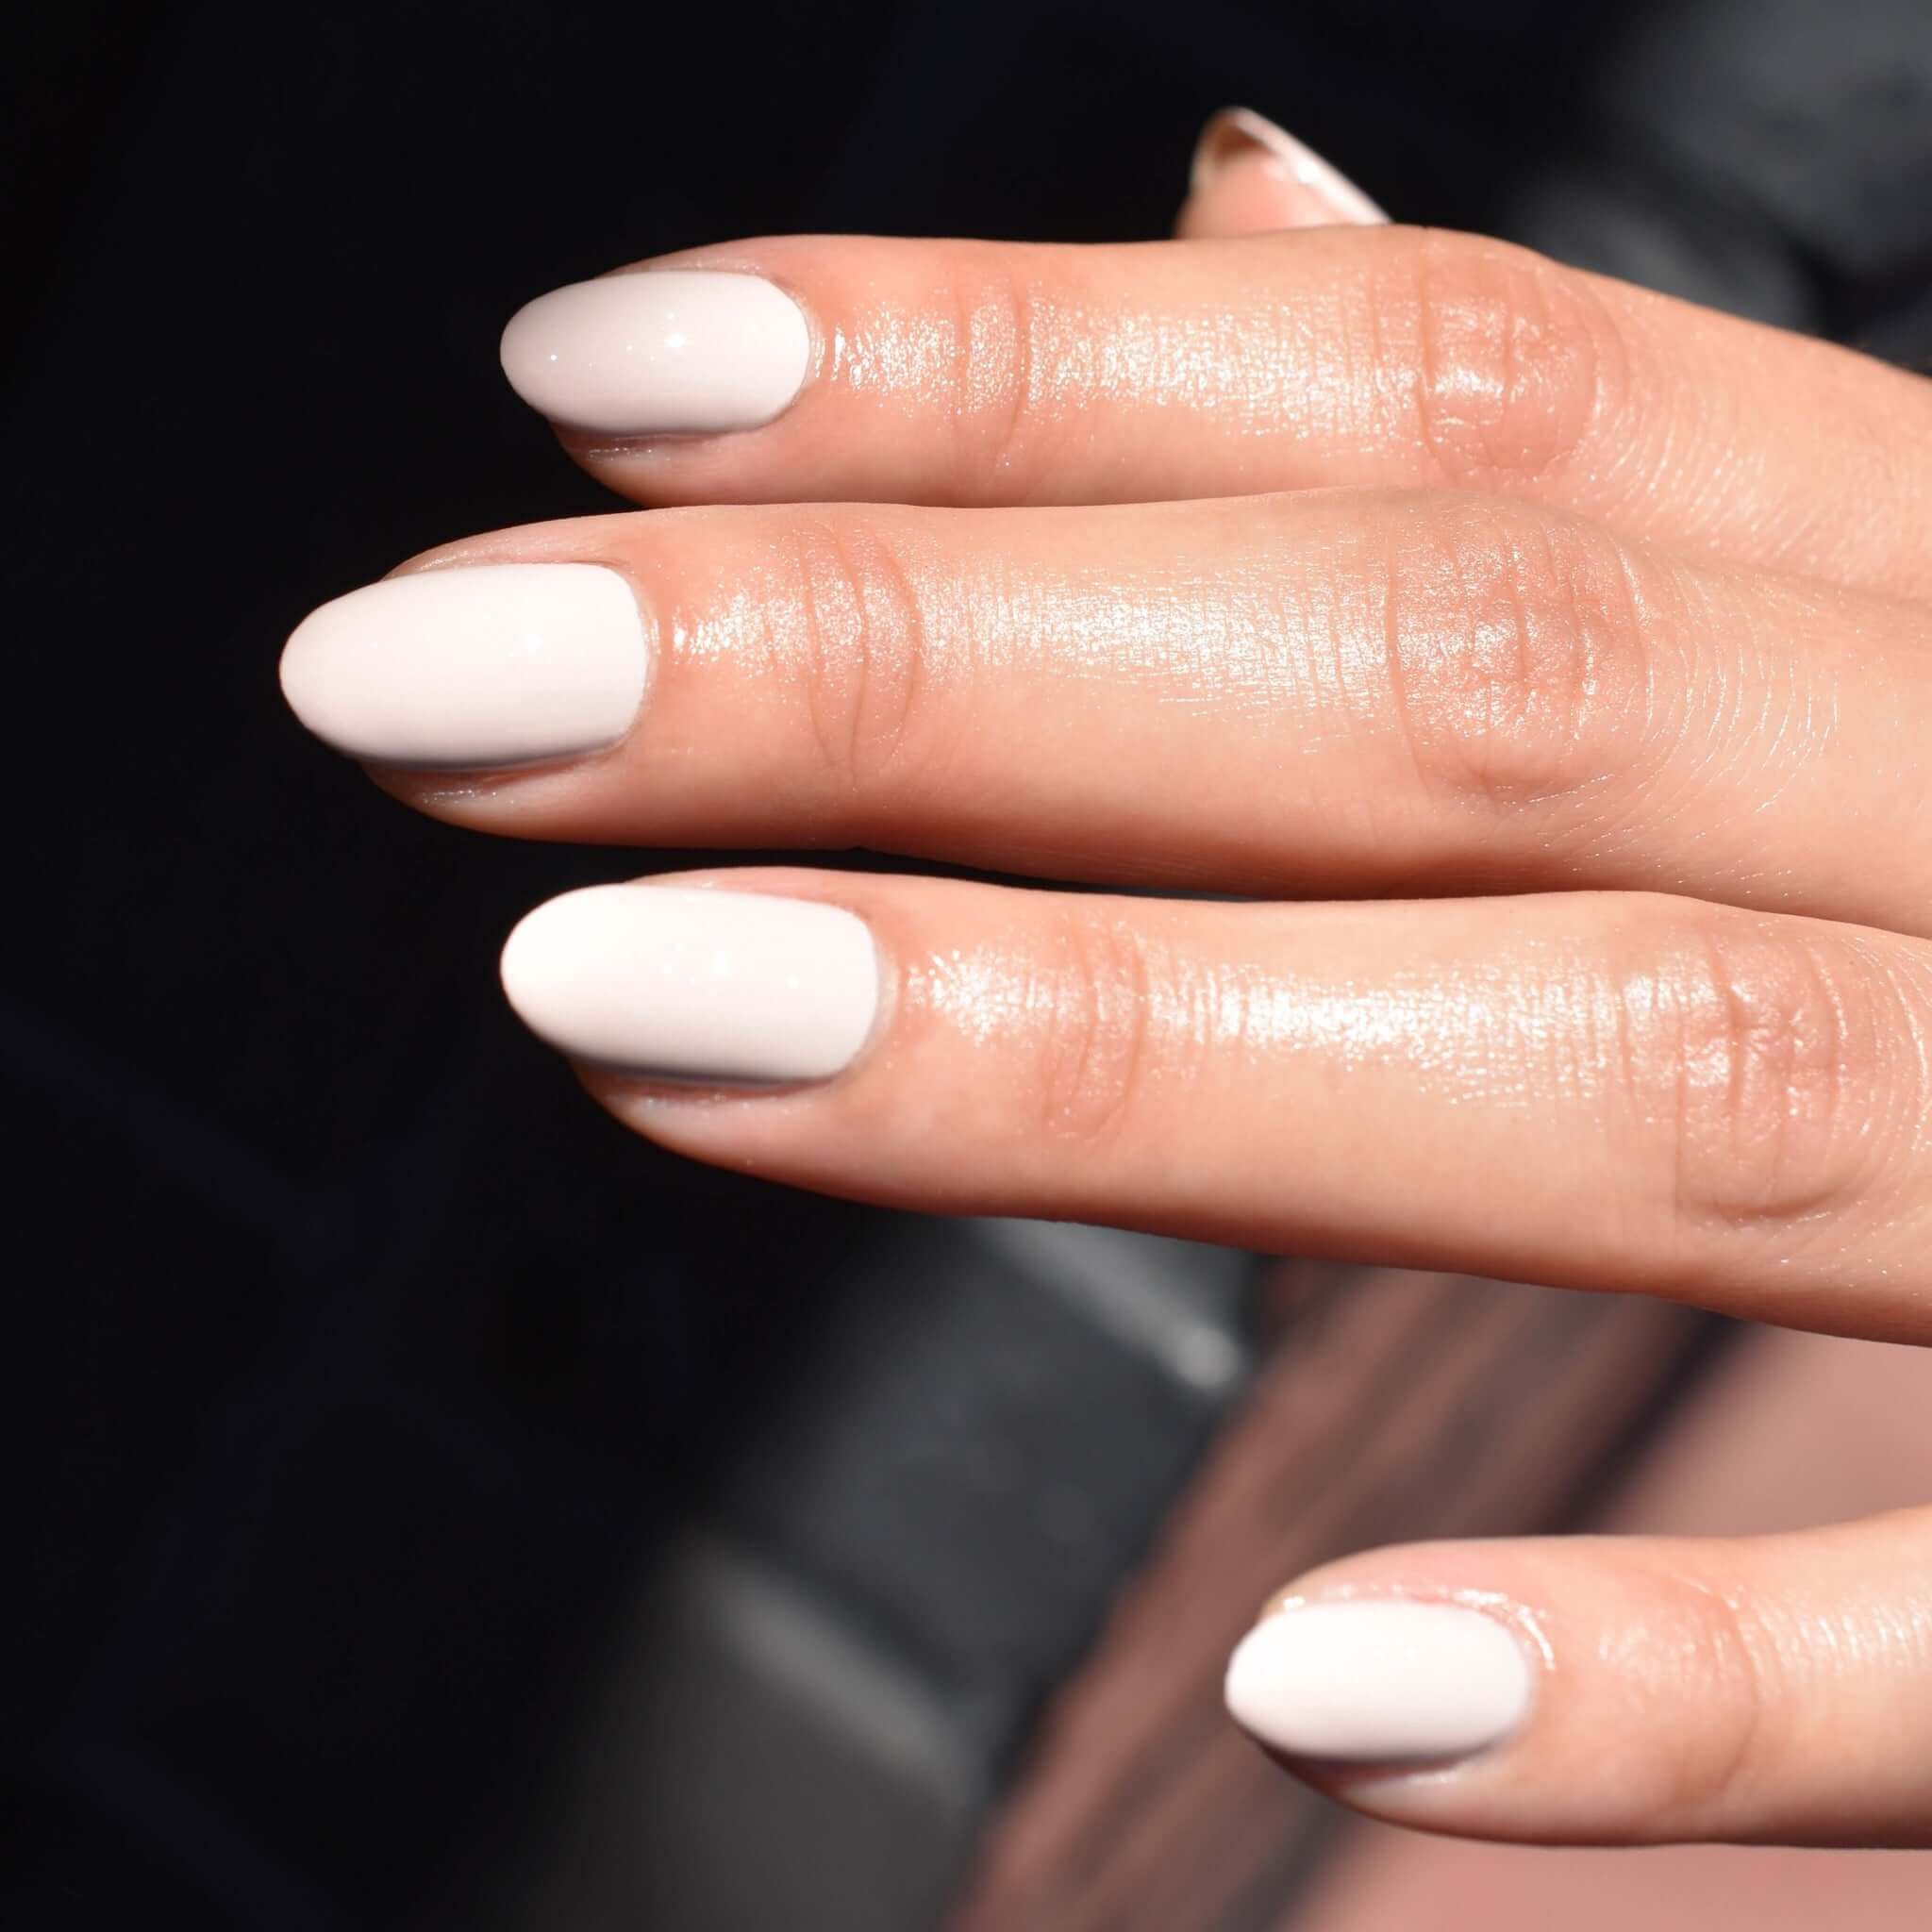 7 New Dark Nail Colors To Try This Fall | HuffPost Life